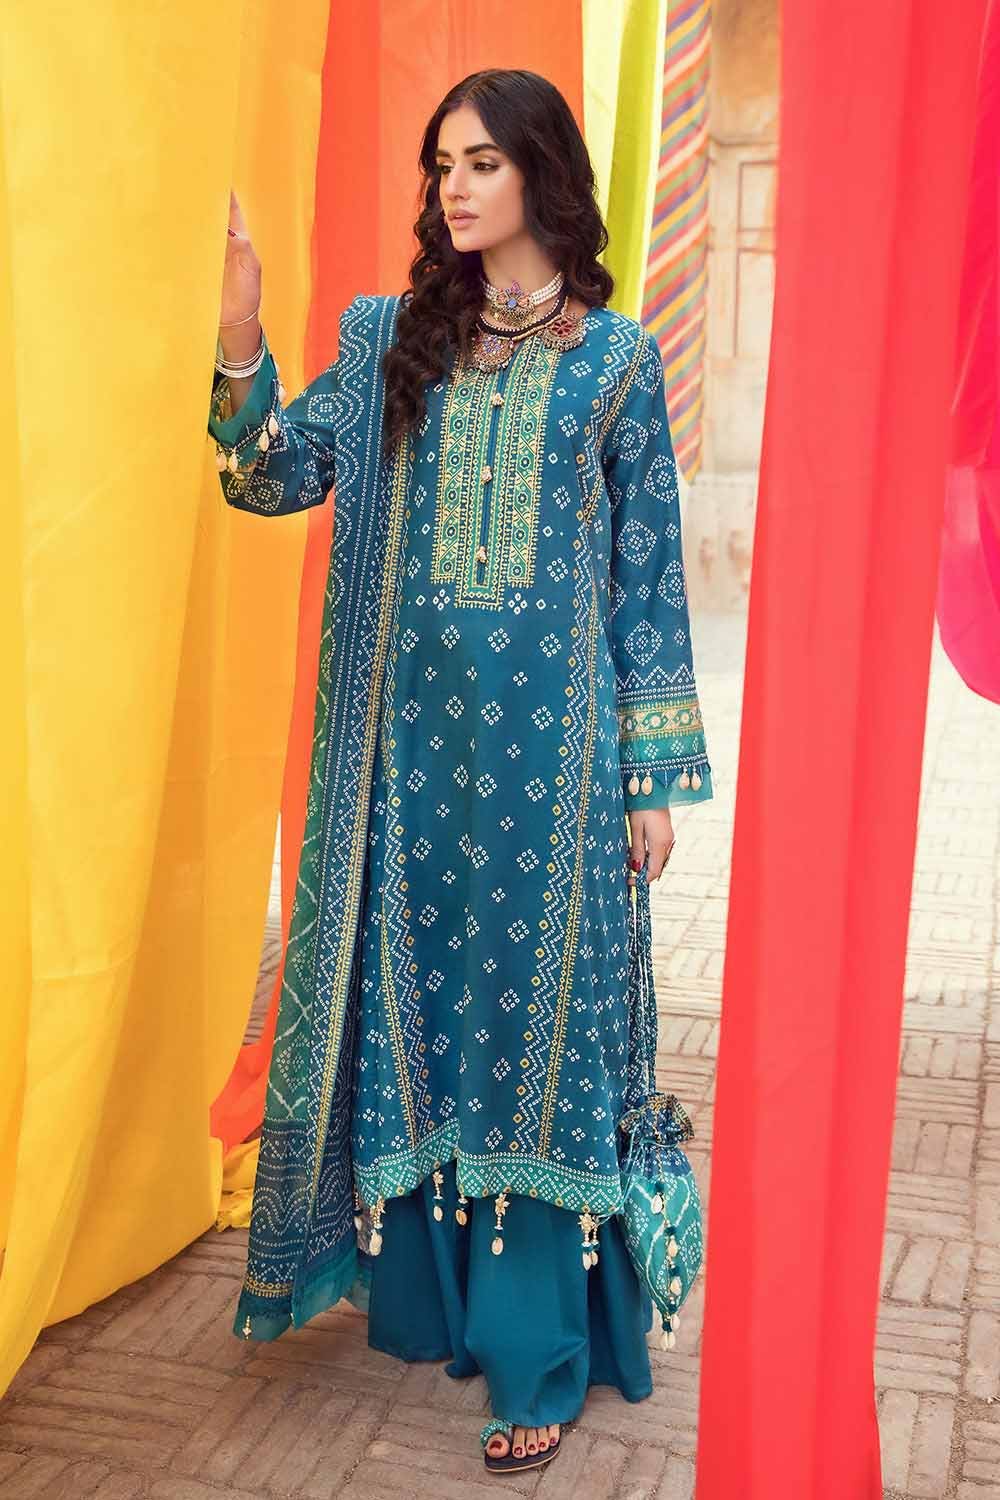 Gul Ahmed 3PC Chunri Lawn Unstitched Gold Printed Suit CL-32093 A